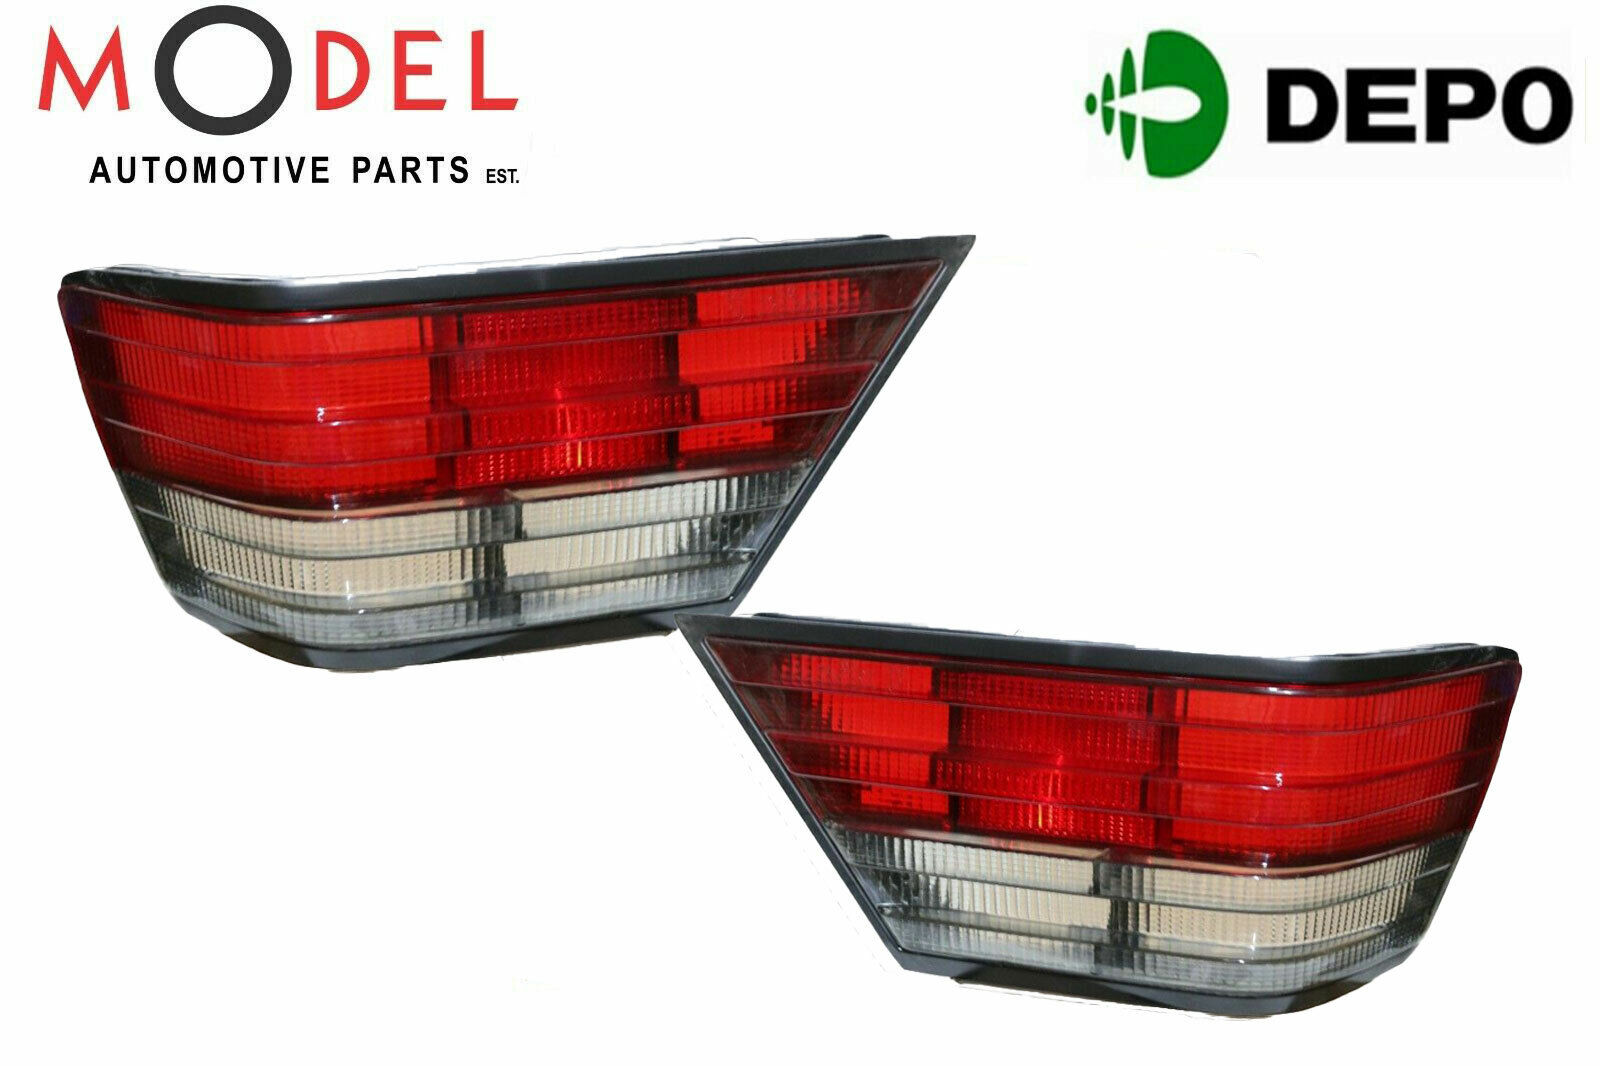 DEPO Lens Tail Lamp Combination Rear Left / Right Set 1248200166 / 1248203466